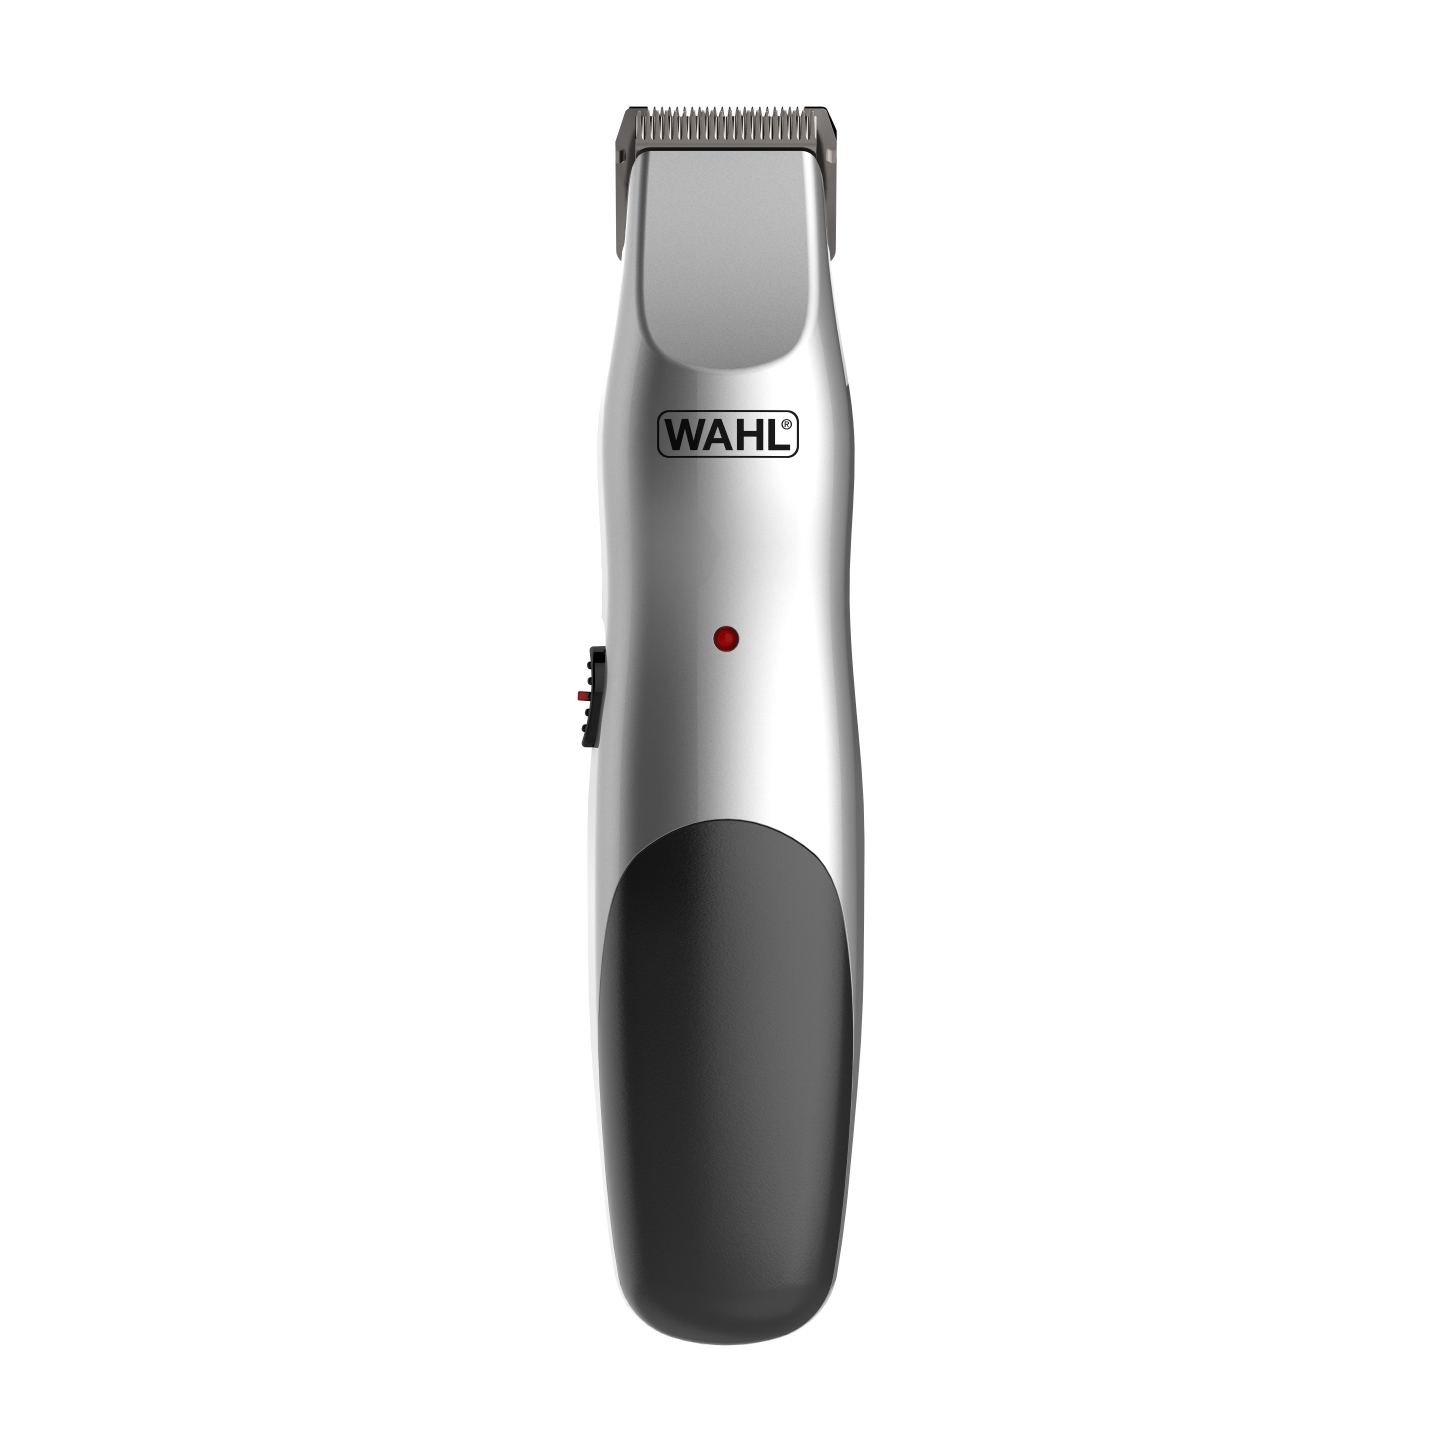 wahl groomsman cordless trimmer